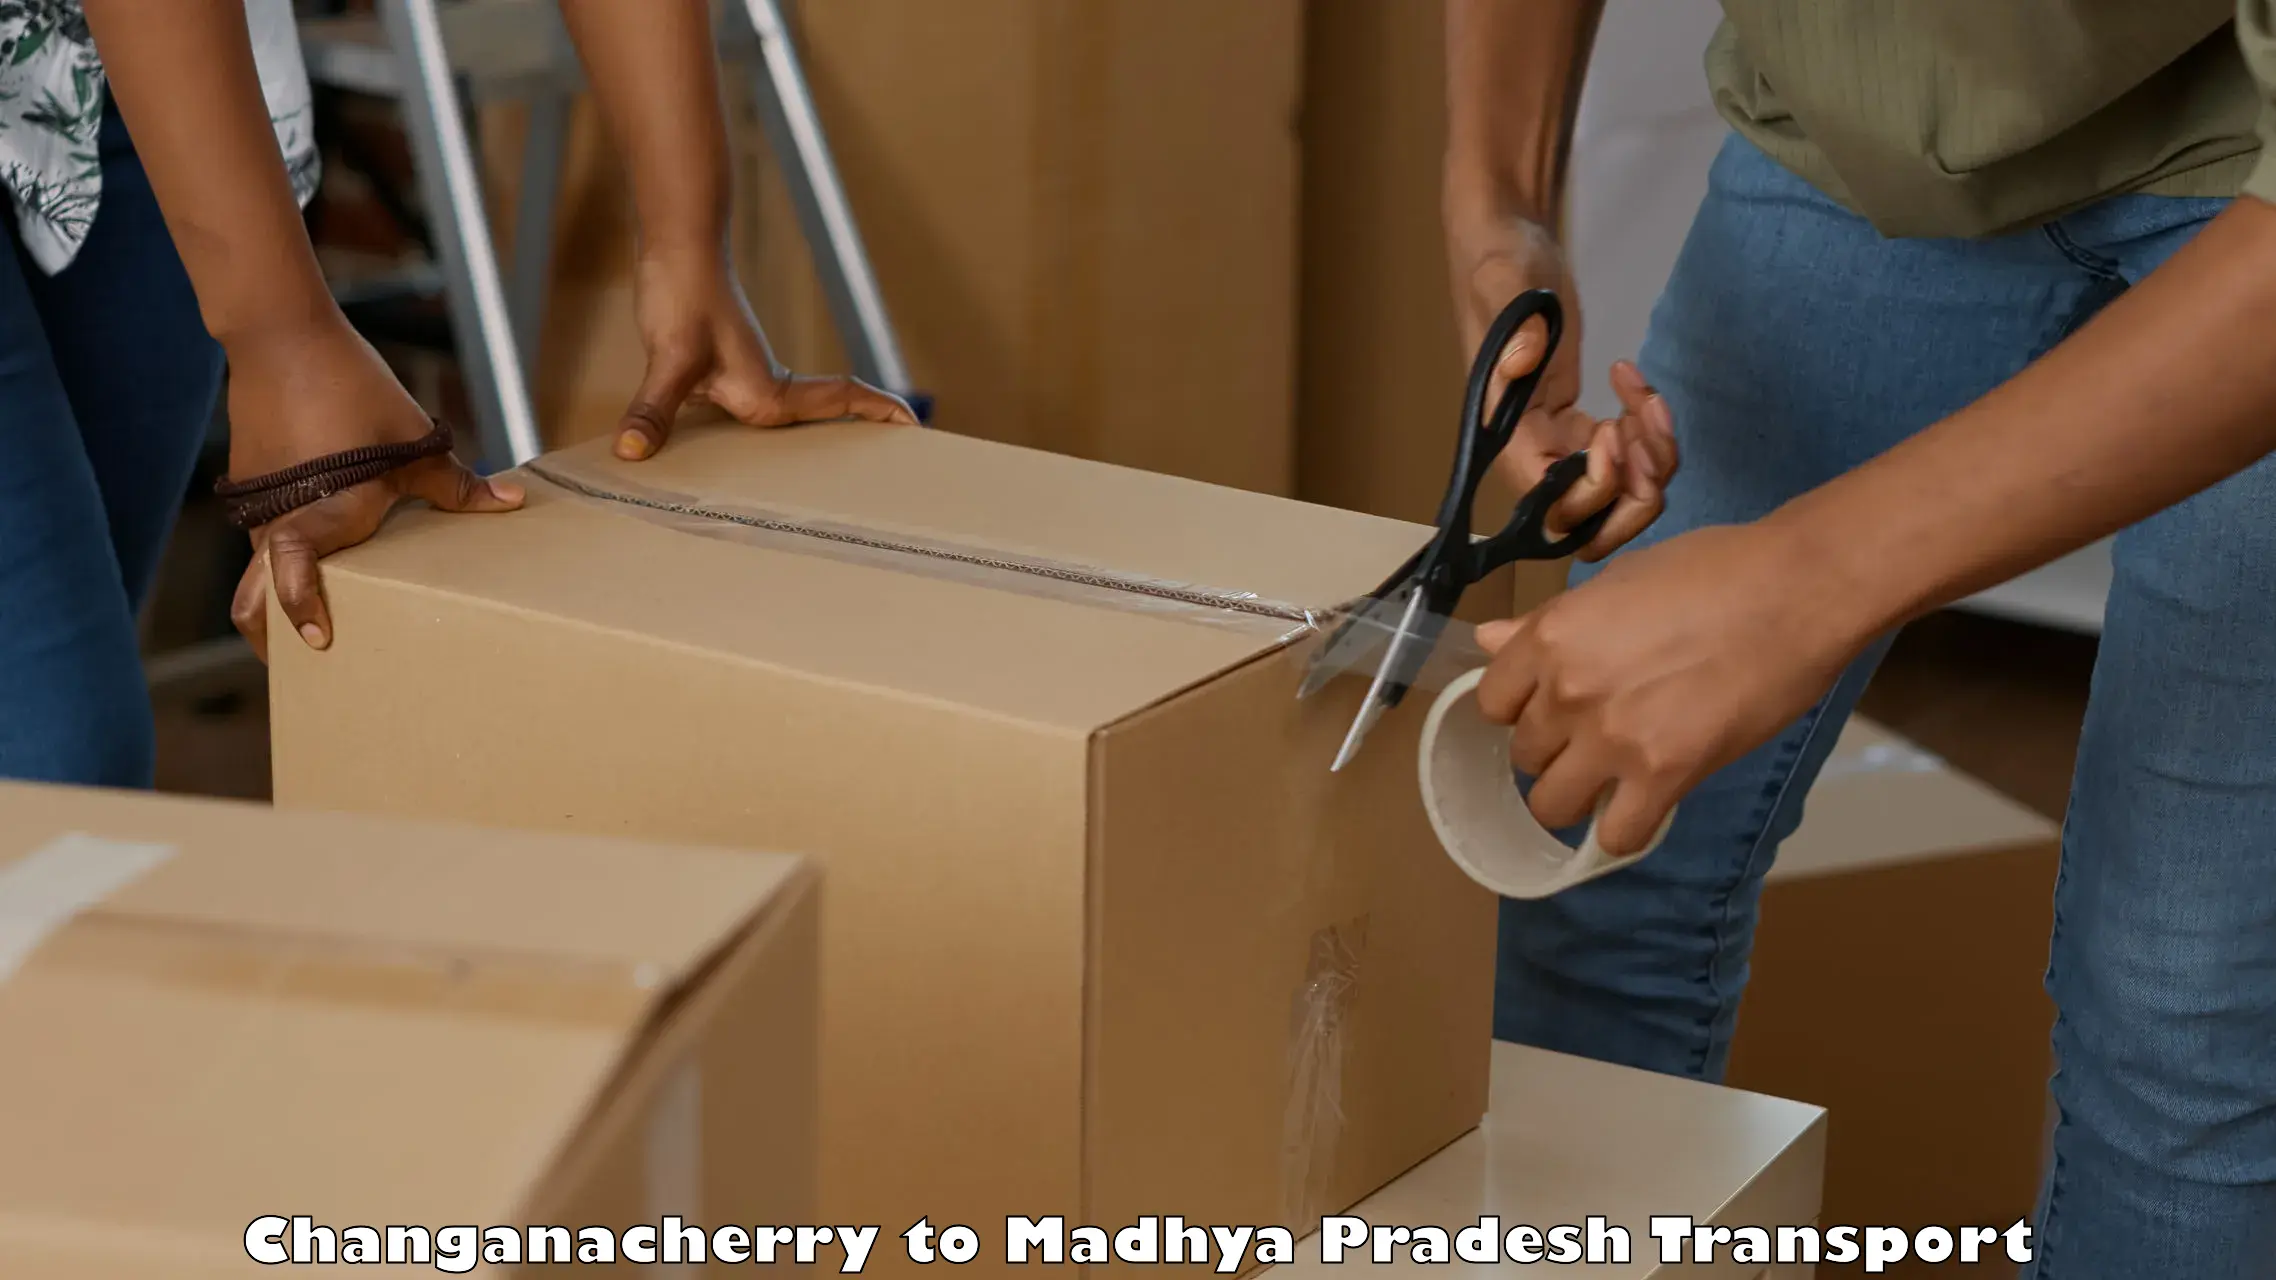 Delivery service Changanacherry to Dhar